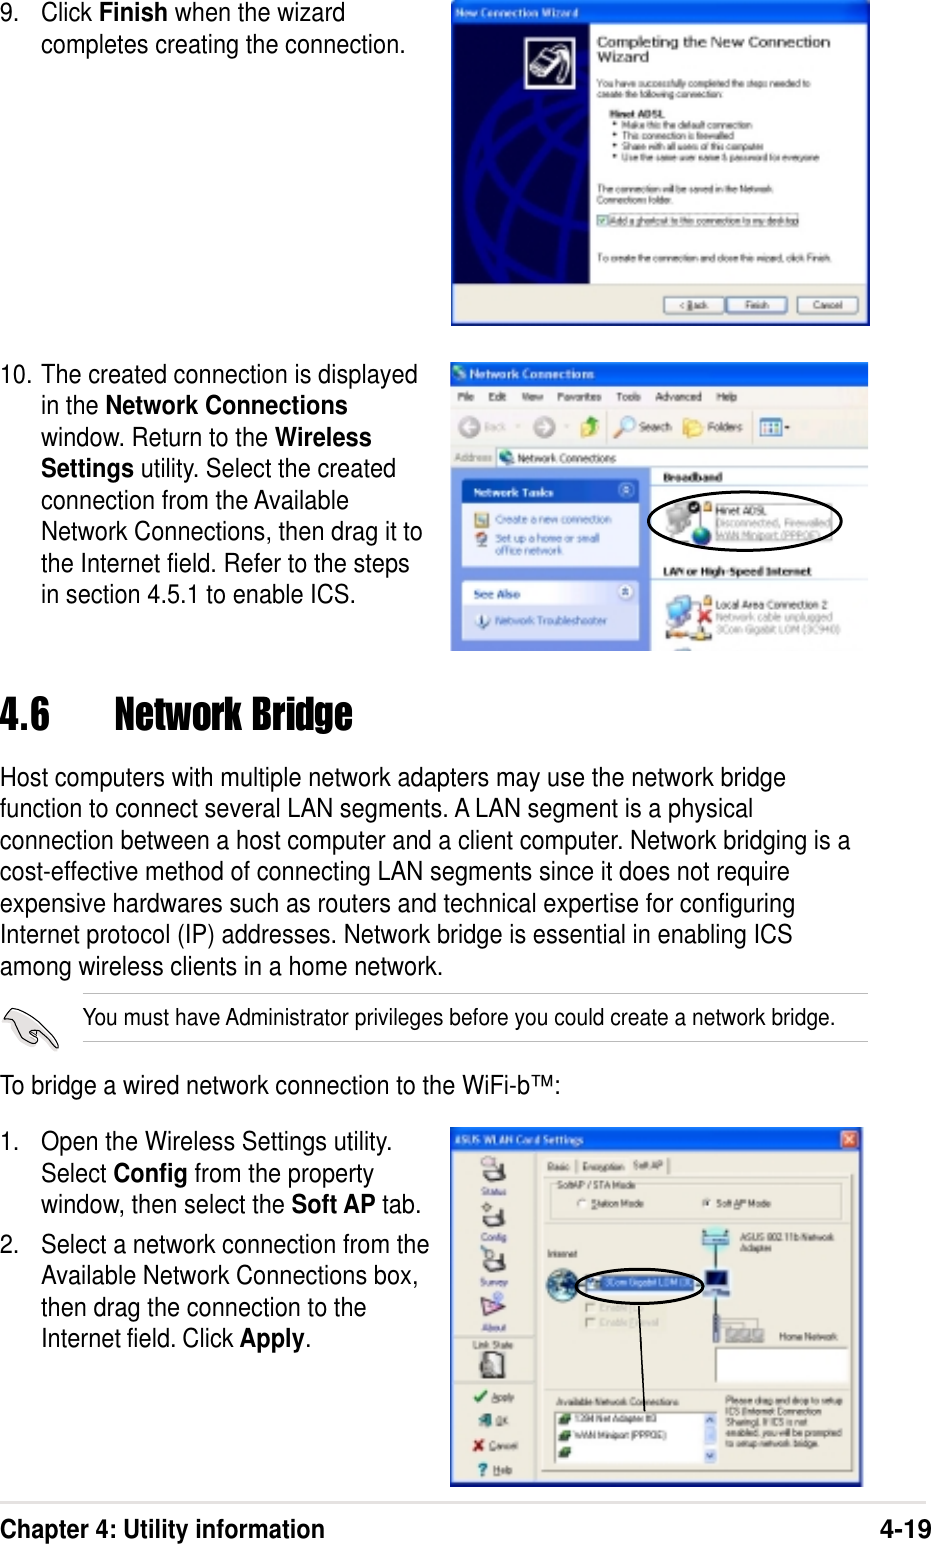 Chapter 4: Utility information4-199. Click Finish when the wizardcompletes creating the connection.10. The created connection is displayedin the Network Connectionswindow. Return to the WirelessSettings utility. Select the createdconnection from the AvailableNetwork Connections, then drag it tothe Internet field. Refer to the stepsin section 4.5.1 to enable ICS.4.6 Network BridgeHost computers with multiple network adapters may use the network bridgefunction to connect several LAN segments. A LAN segment is a physicalconnection between a host computer and a client computer. Network bridging is acost-effective method of connecting LAN segments since it does not requireexpensive hardwares such as routers and technical expertise for configuringInternet protocol (IP) addresses. Network bridge is essential in enabling ICSamong wireless clients in a home network.You must have Administrator privileges before you could create a network bridge.To bridge a wired network connection to the WiFi-b™:1. Open the Wireless Settings utility.Select Config from the propertywindow, then select the Soft AP tab.2. Select a network connection from theAvailable Network Connections box,then drag the connection to theInternet field. Click Apply.